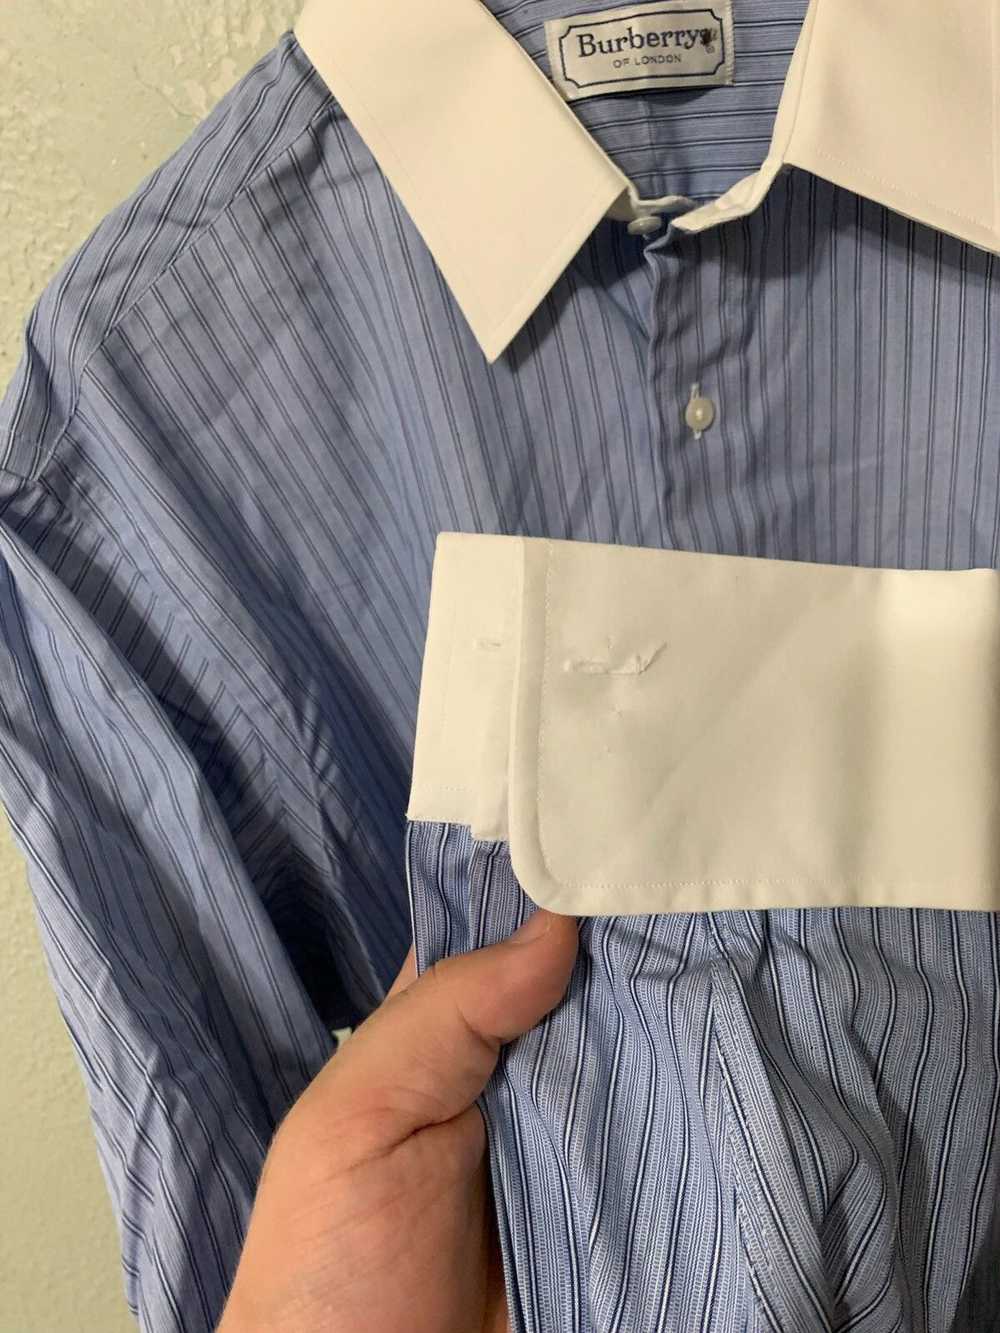 Vintage Vintage Burberry French Cuff Shirt - image 3